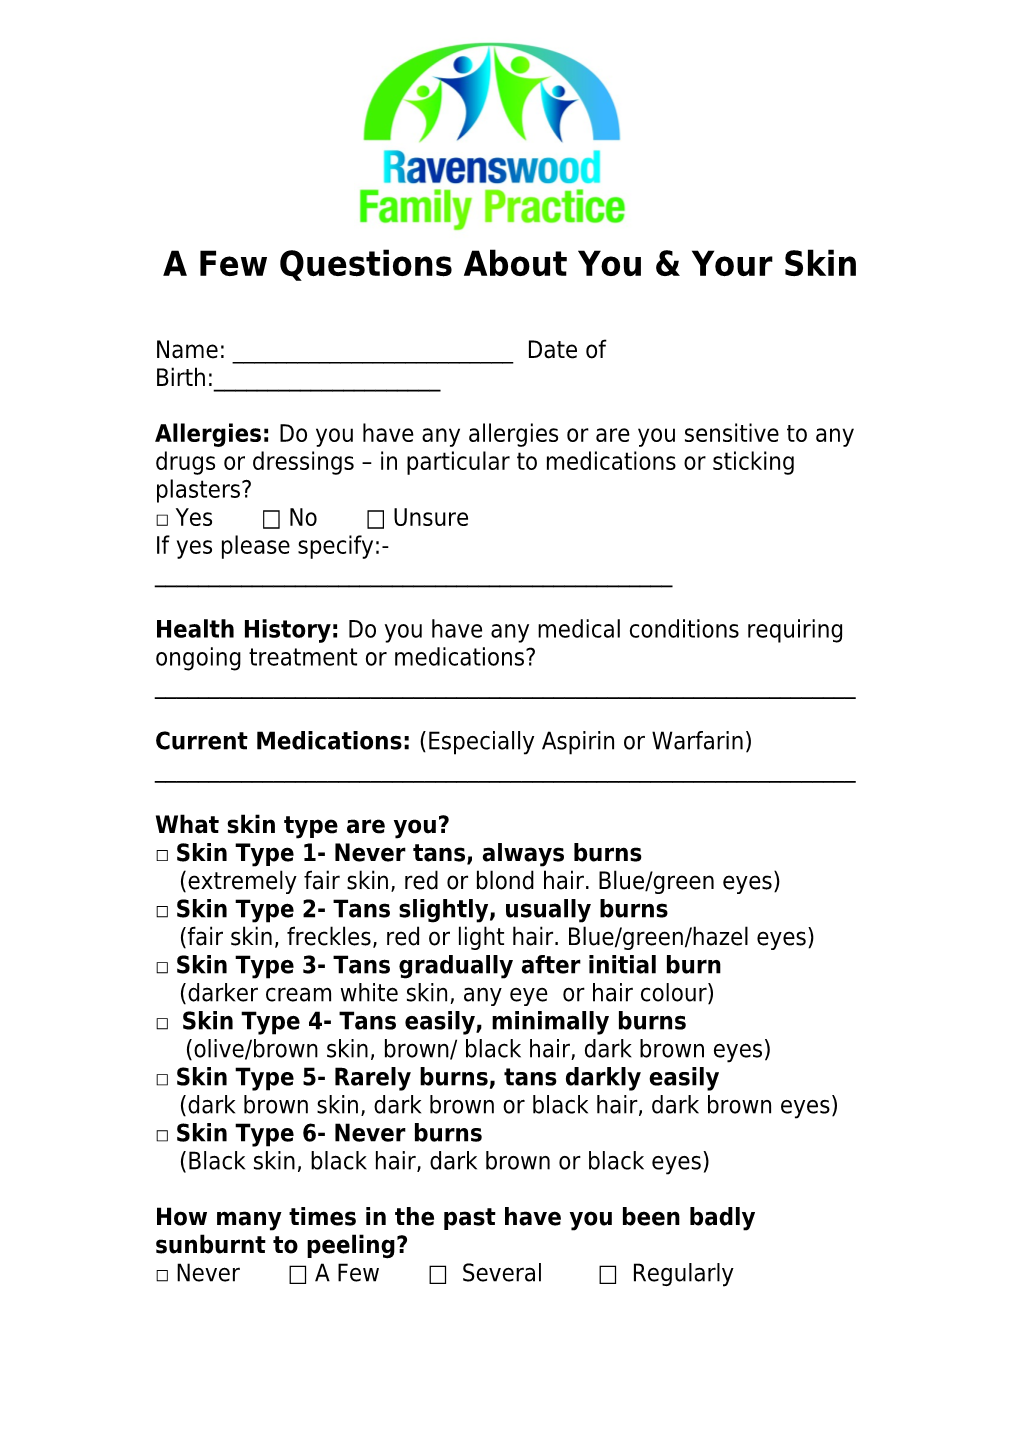 A Few Questions About You & Your Skin